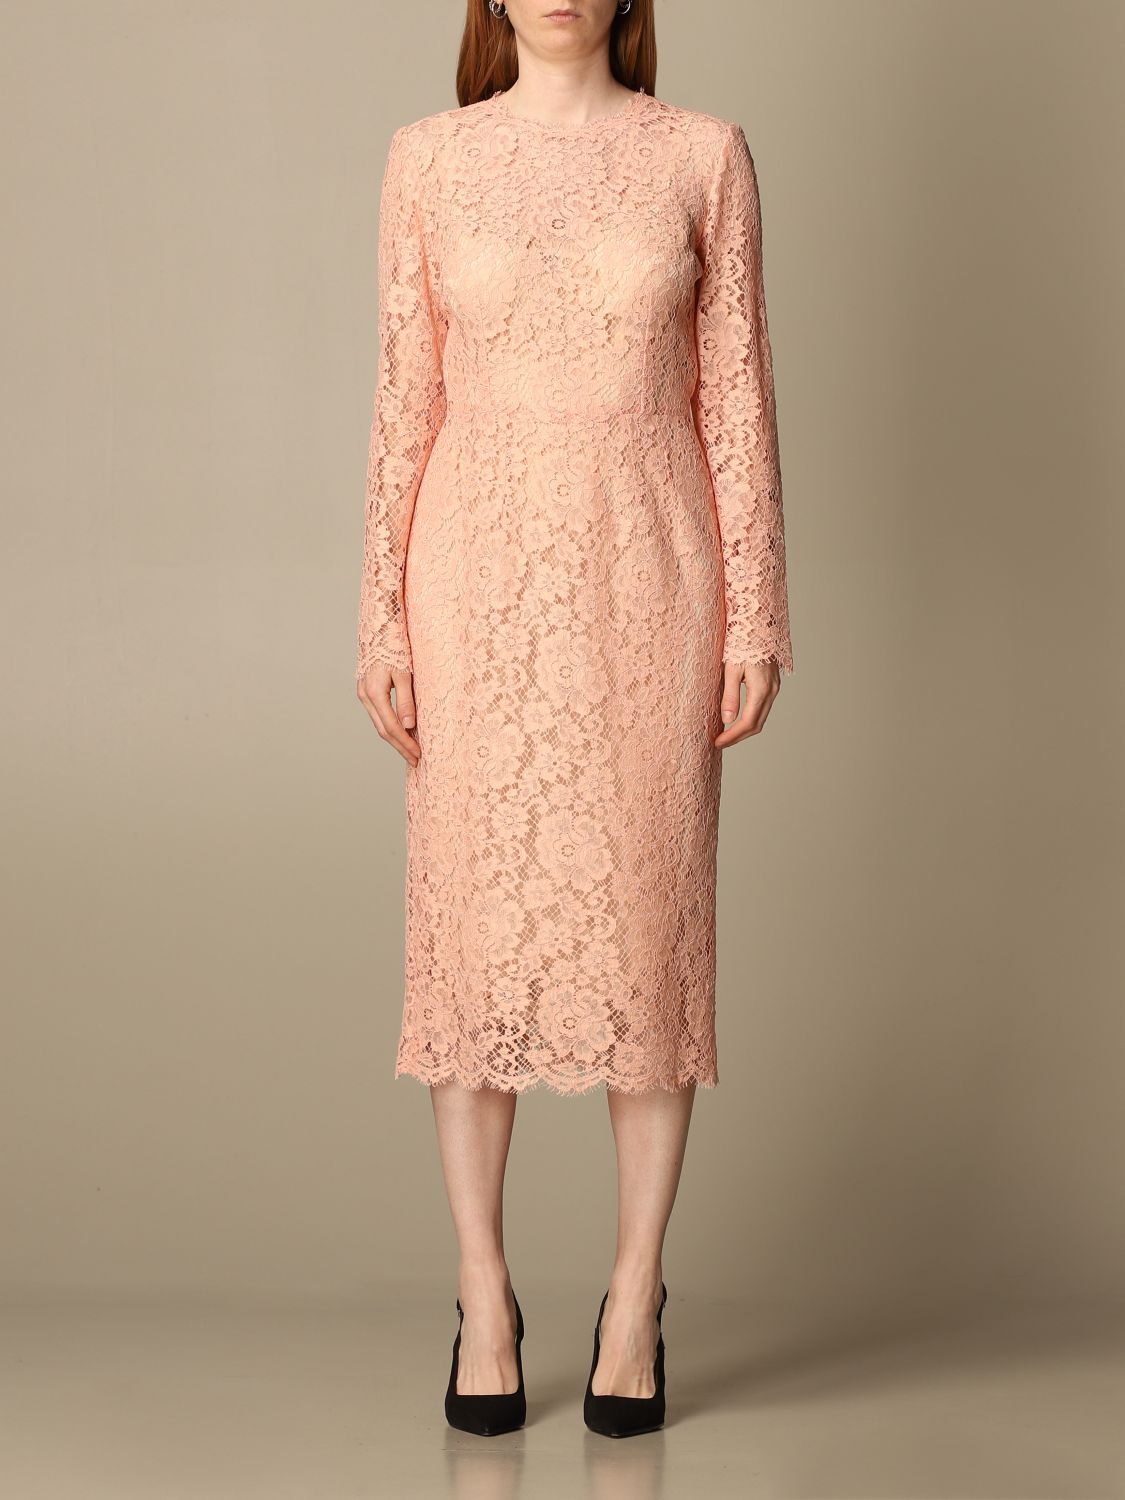 JEP Staat verstoring DOLCE & GABBANA: lace midi dress | Dress Dolce & Gabbana Women Pink | Dress  Dolce & Gabbana F6M0DT HLM0M GIGLIO.COM